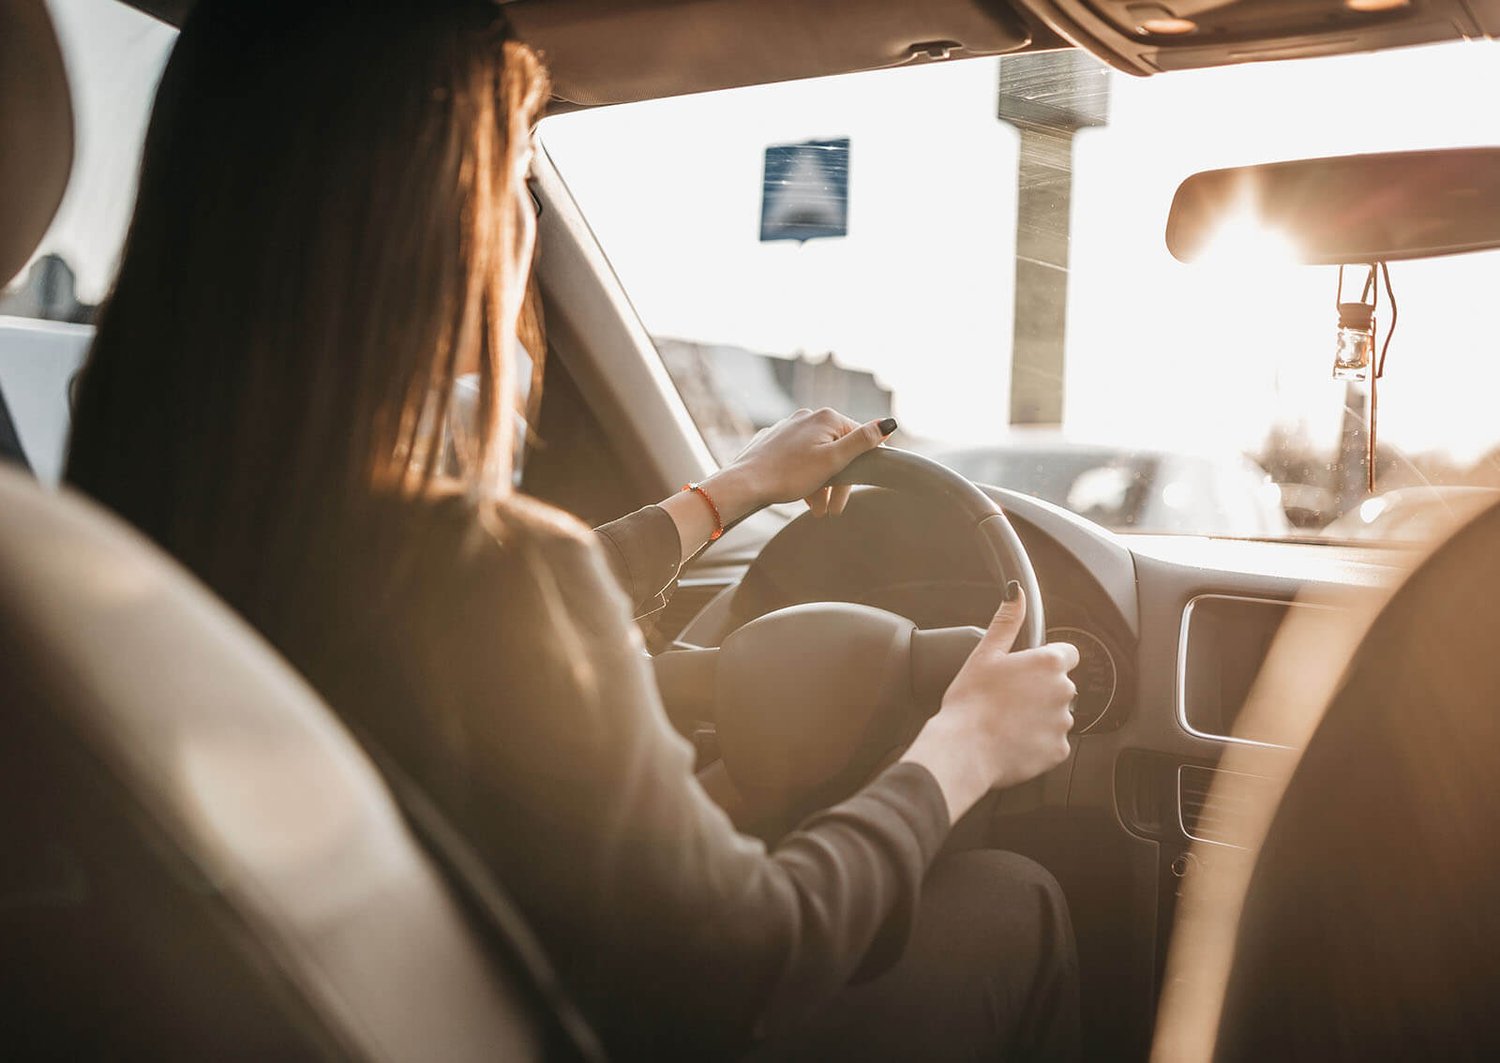 STUDY] Men Are More Confident Drivers, but Data Shows Women Are